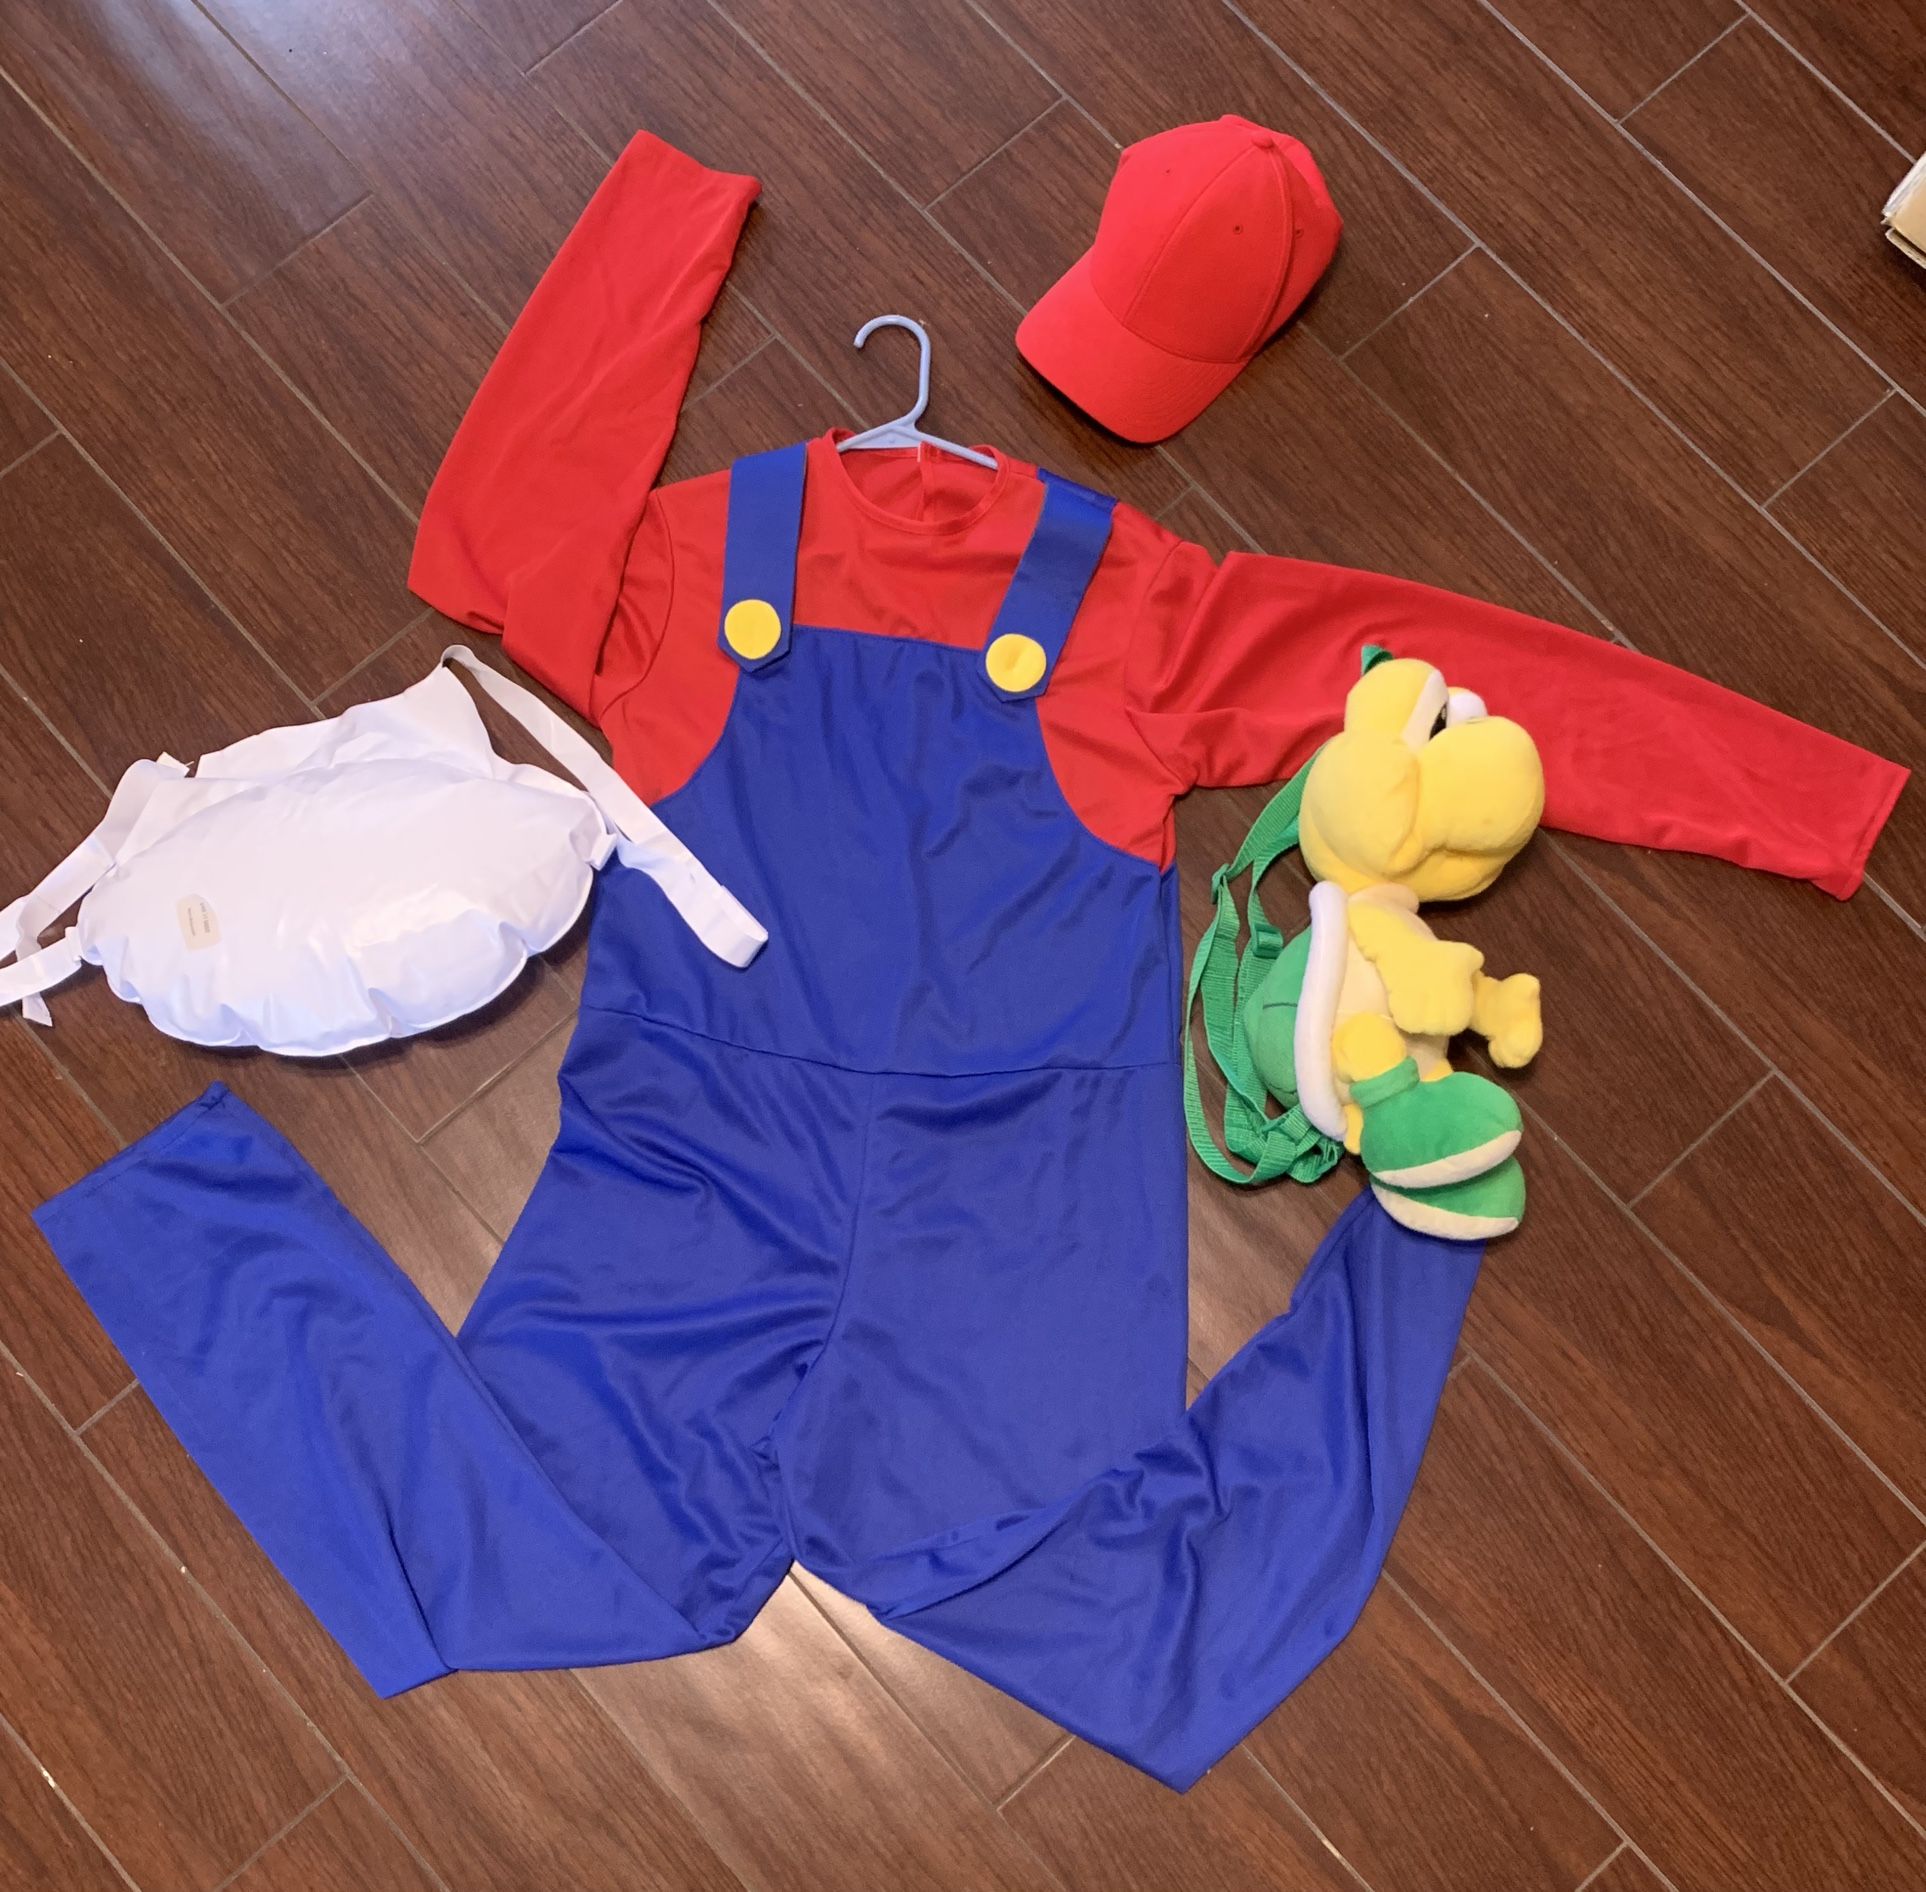 Adult Mario Costume (Check Out All My Other Halloween Costumes!)